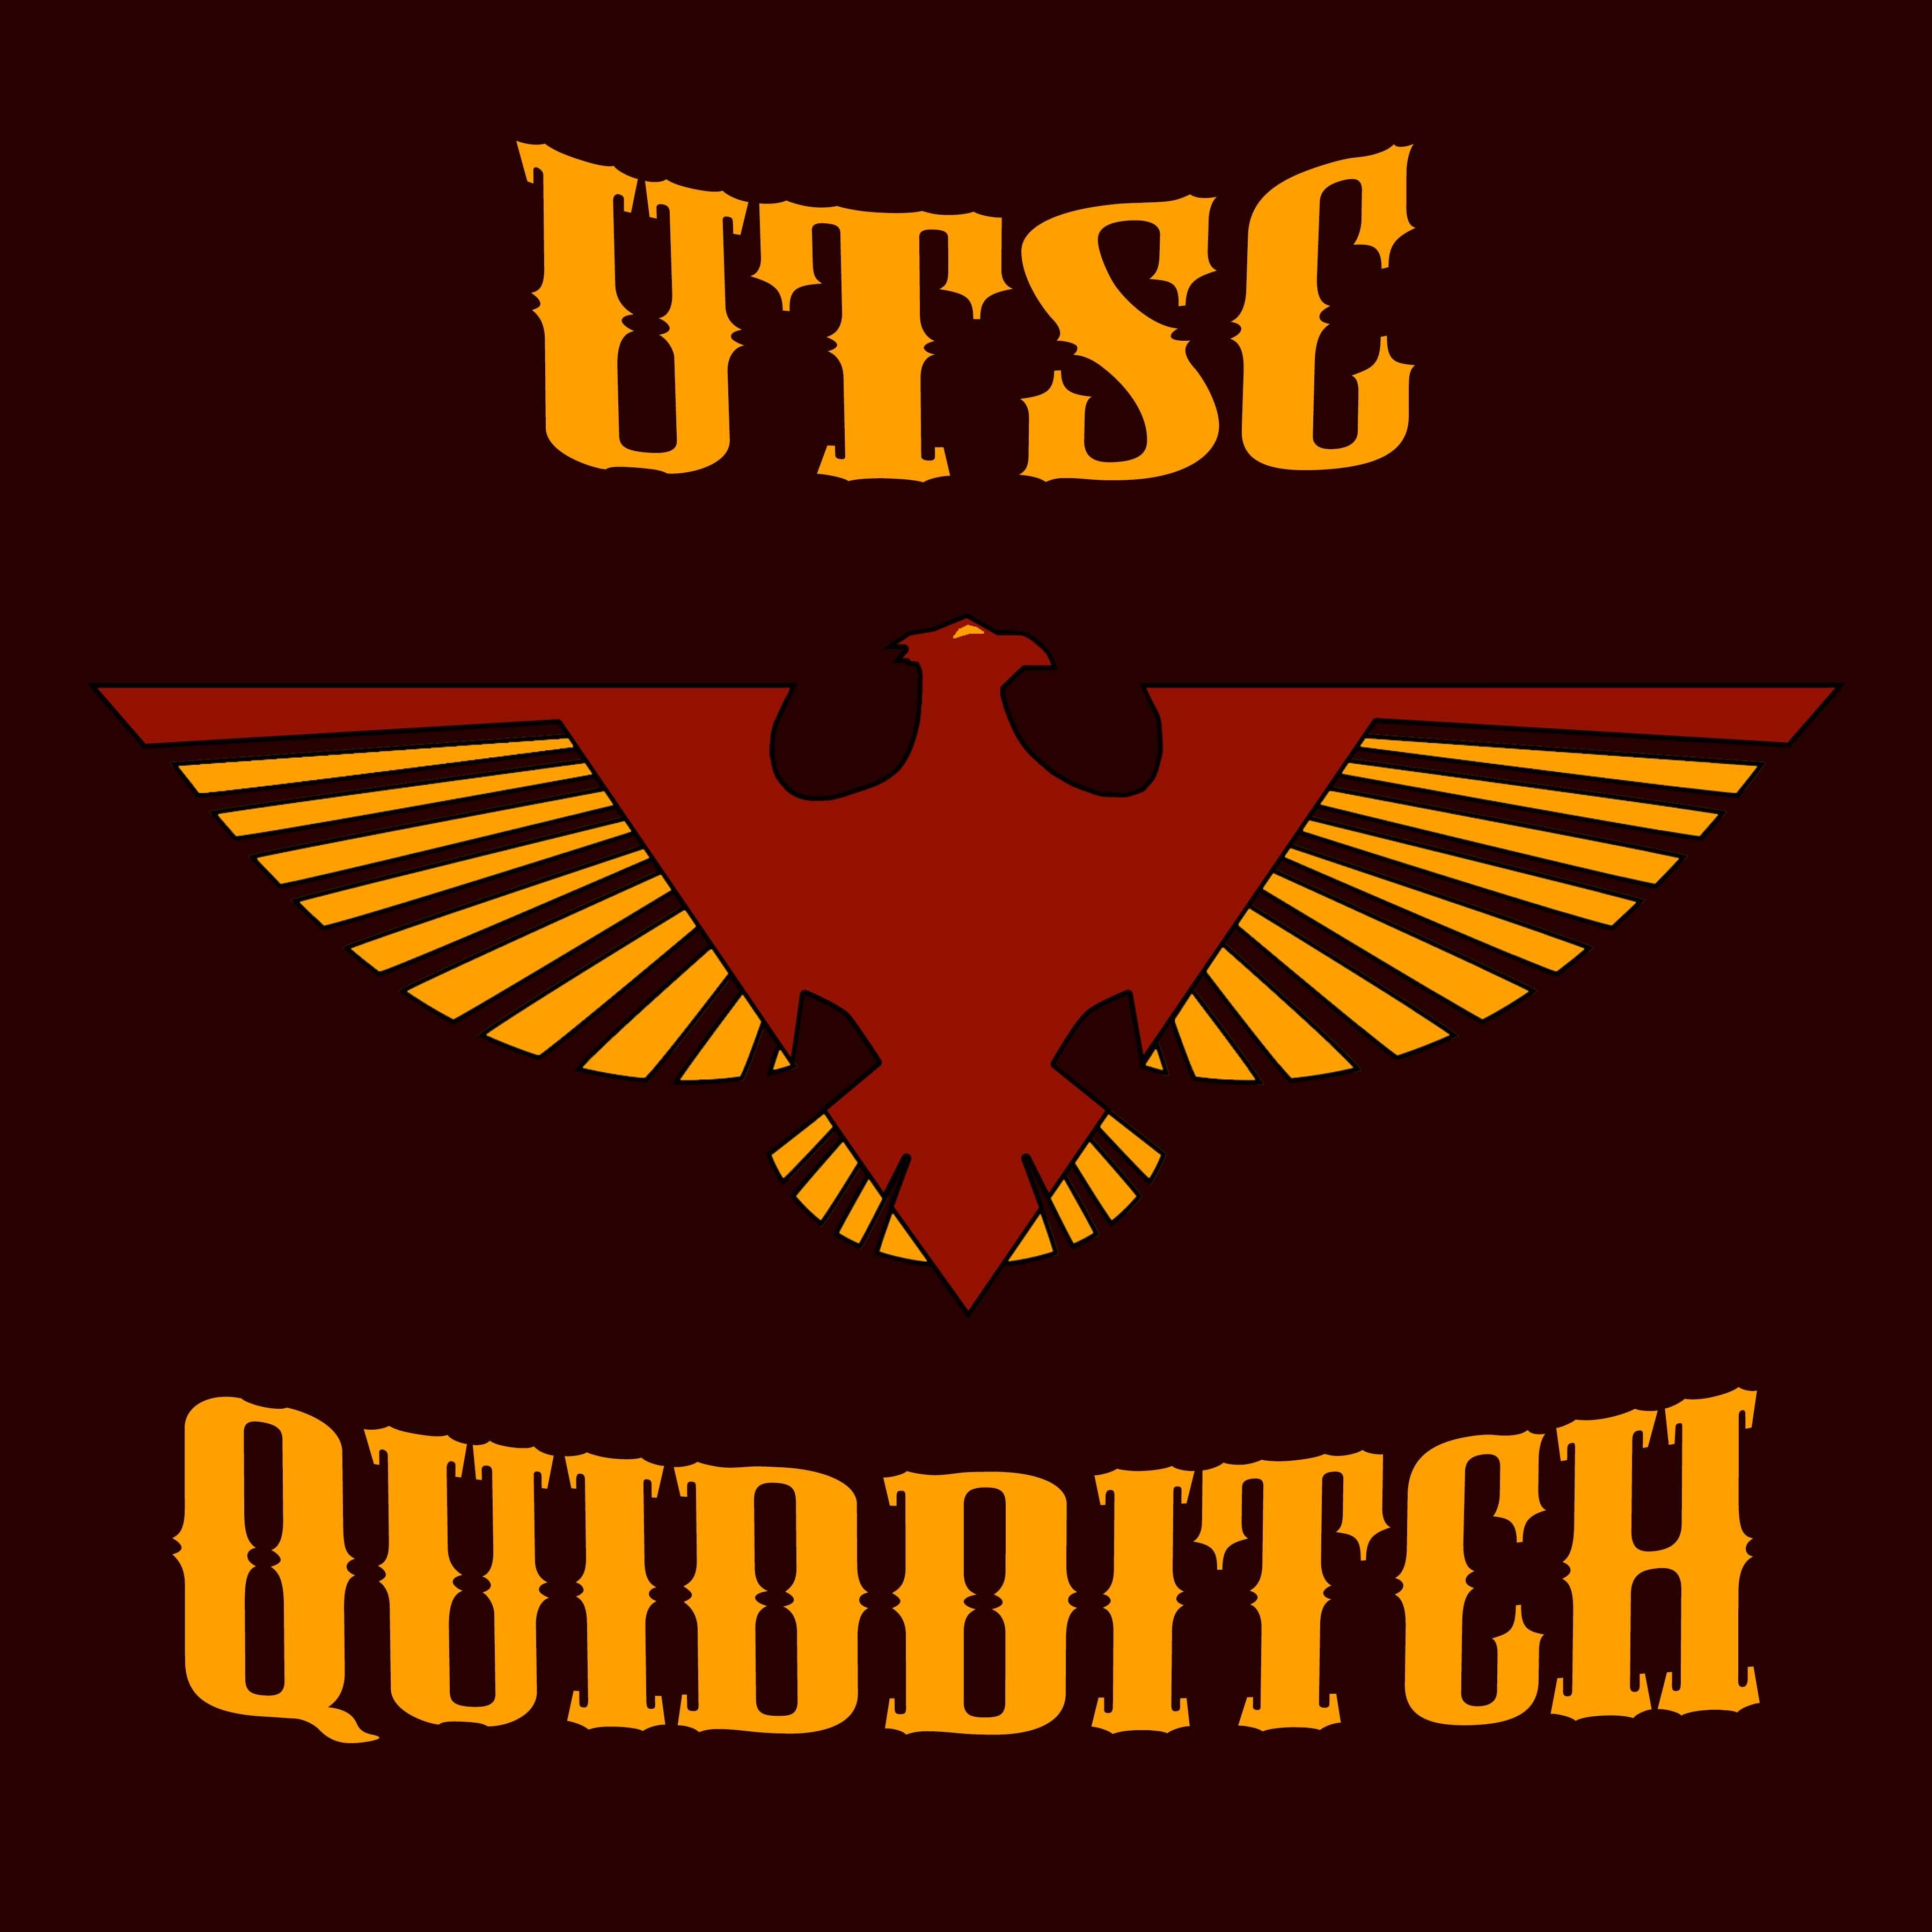 UTSC Quidditch is the official quidditch team of UofT Scarborough. Our aim is to promote fitness and a healthy lifestyle via something refreshingly different.